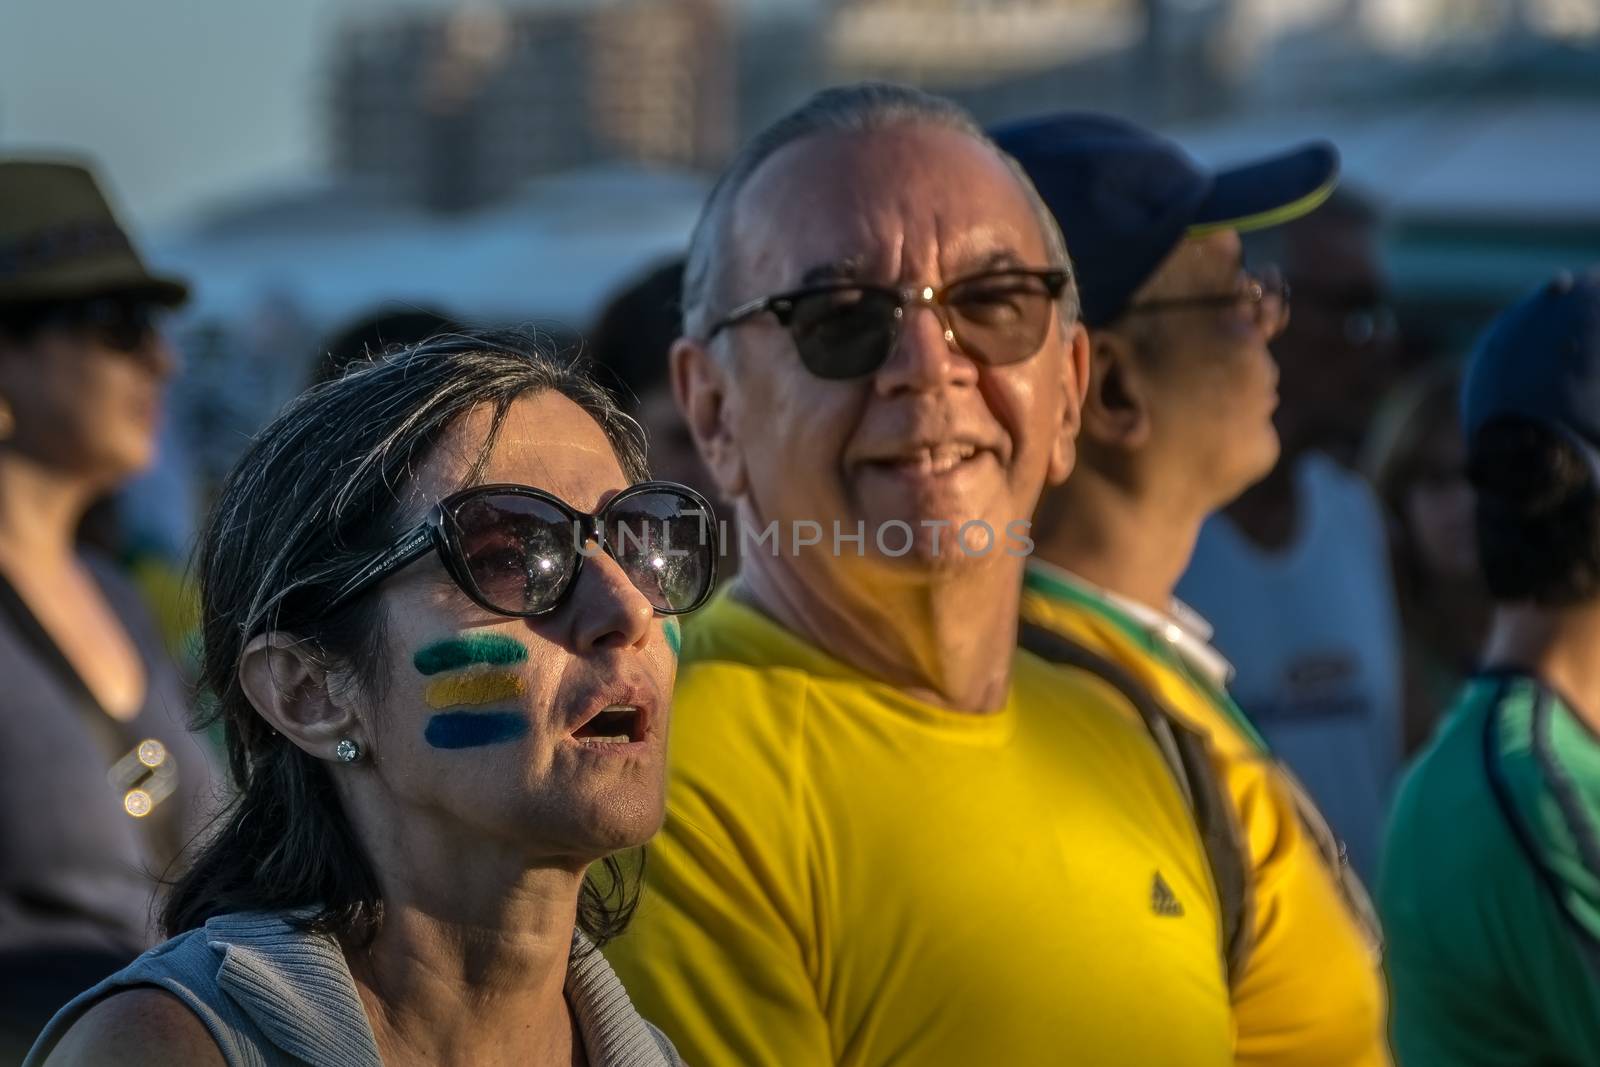 BRAZIL, Rio de Janeiro: People take part in a demonstration in favor of the impeachment of President Dilma Rousseff, in Copacabana, Rio de Janeiro, on April 17, 2016. Brazilian lawmakers on Sunday reached the two thirds majority necessary to authorize impeachment proceedings against President Dilma Rousseff. The lower house vote sends Rousseff's case to the Senate, which can vote to open a trial. A two thirds majority in the upper house would eject her from office. Rousseff, whose approval rating has plunged to a dismal 10 percent, faces charges of embellishing public accounts to mask the budget deficit during her 2014 reelection.